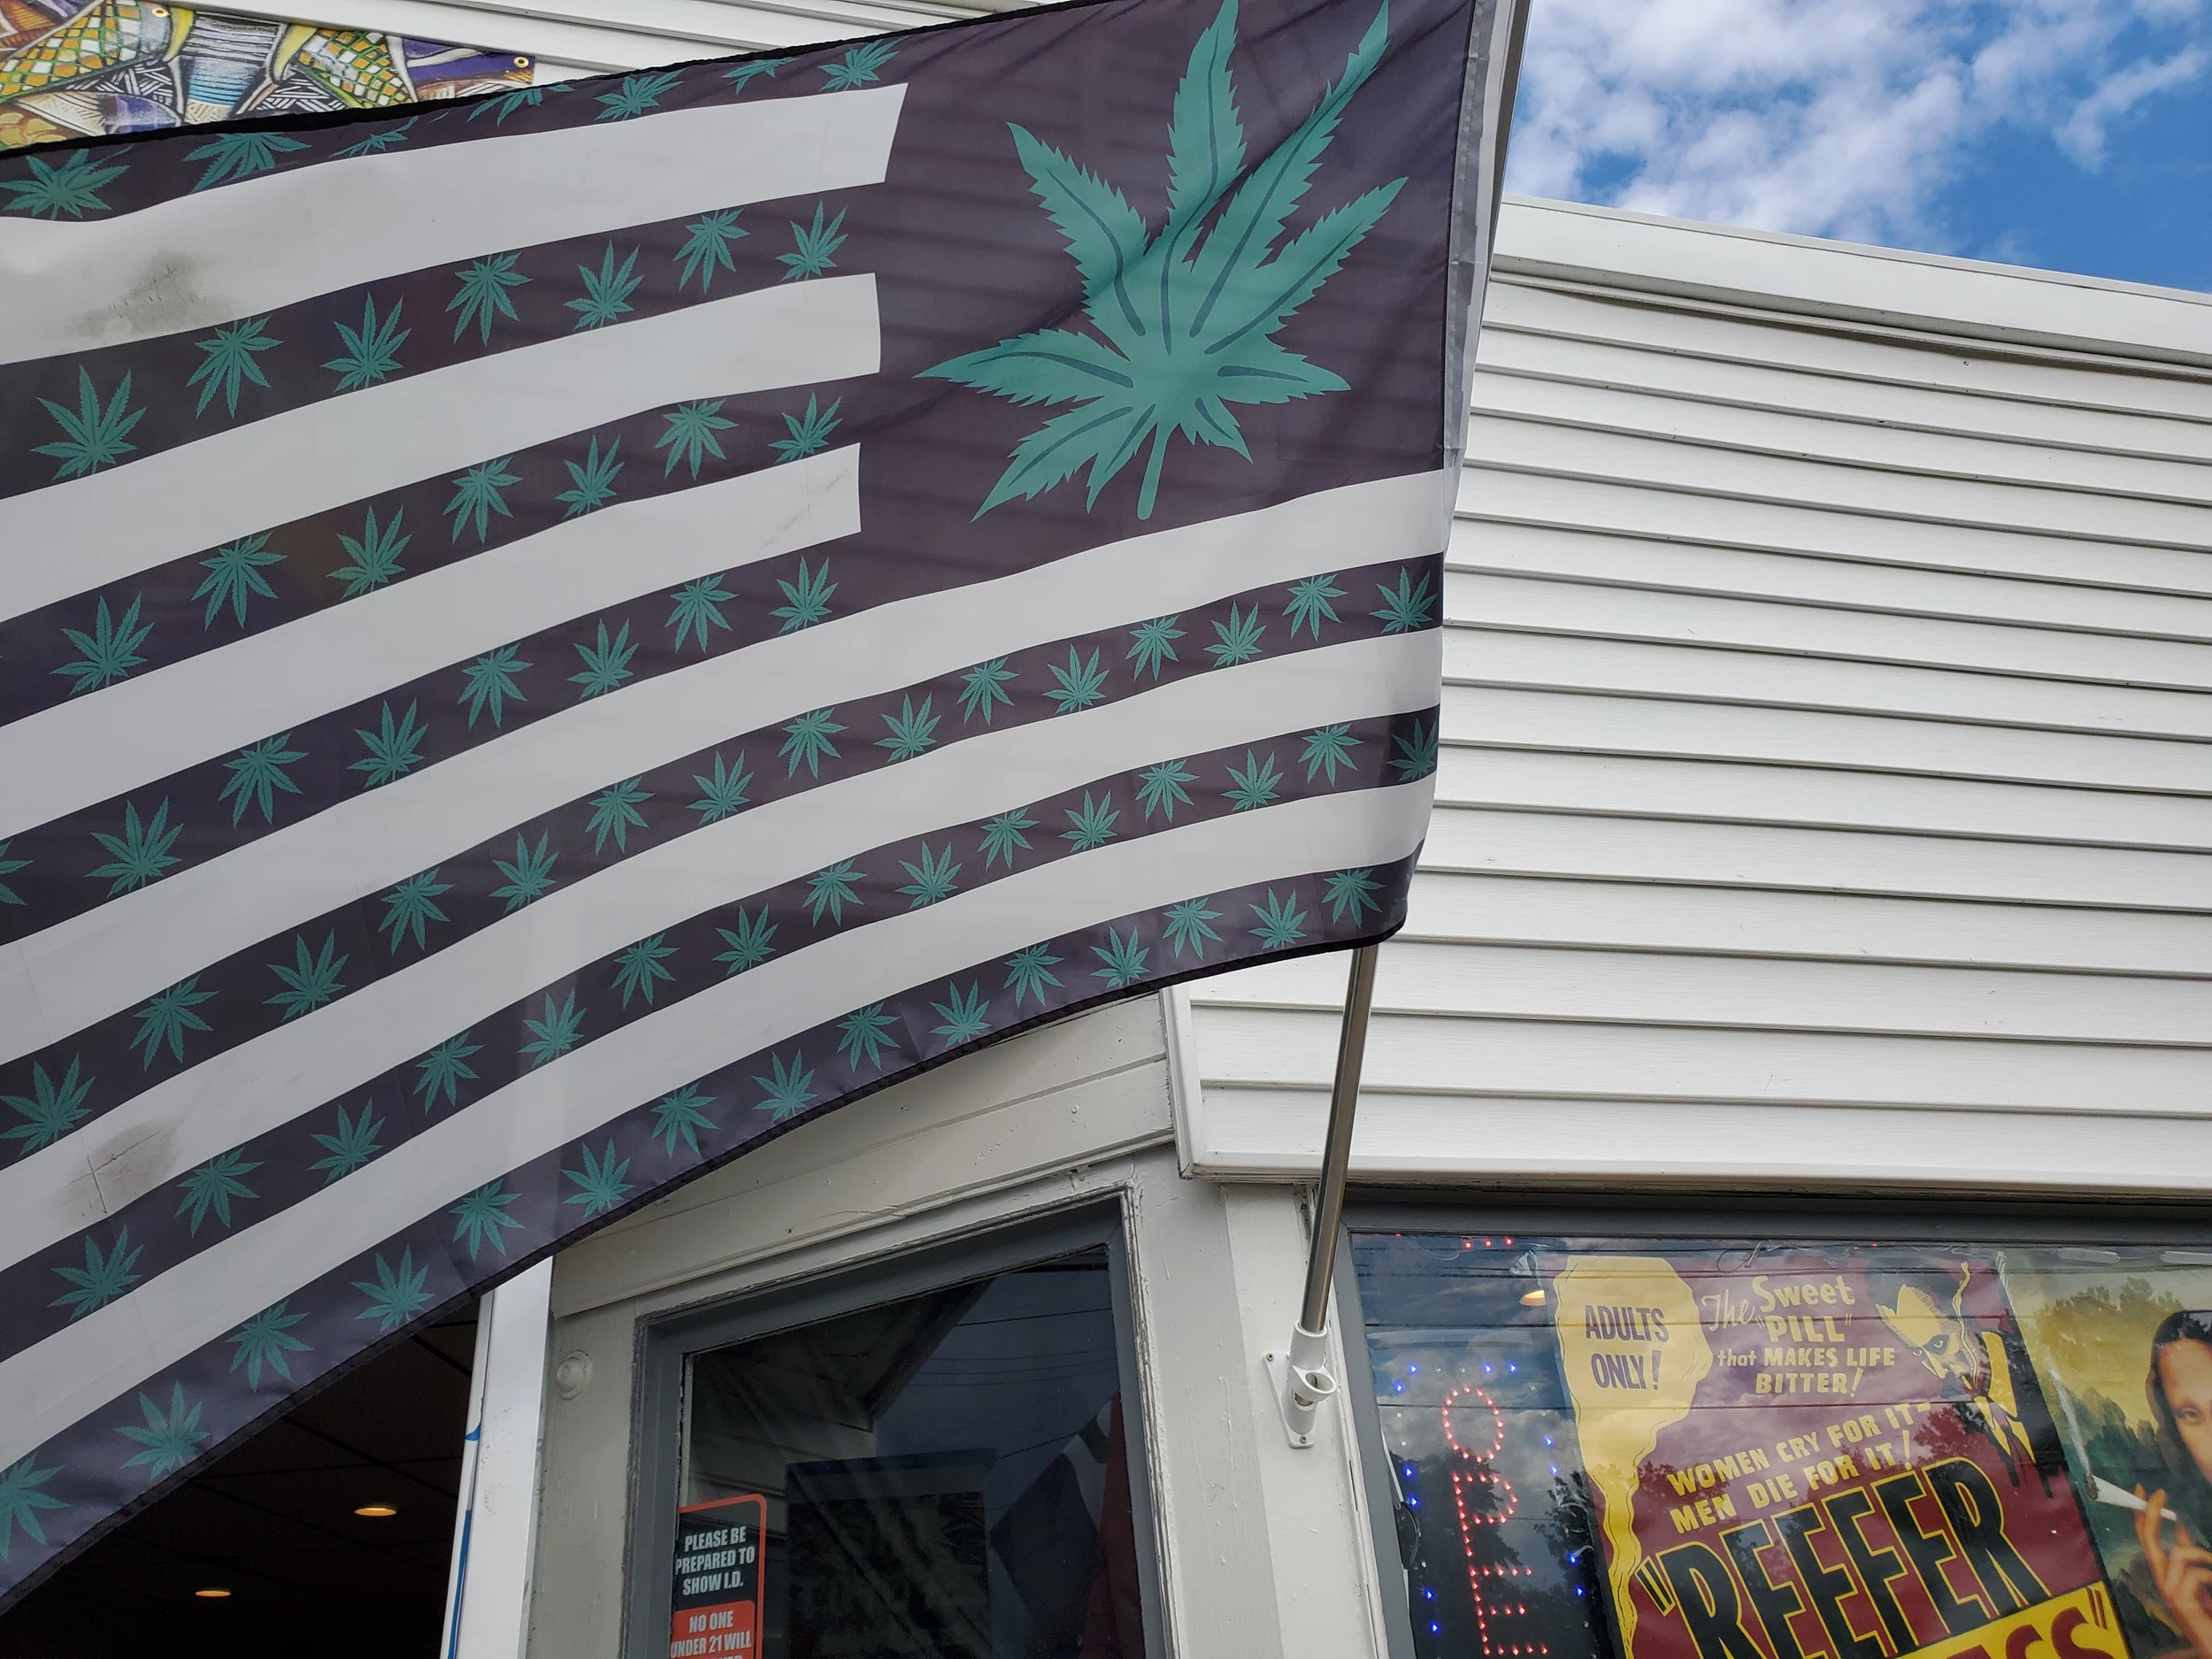 Two Retail Licenses Approved for Binghamton Cannabis Shops